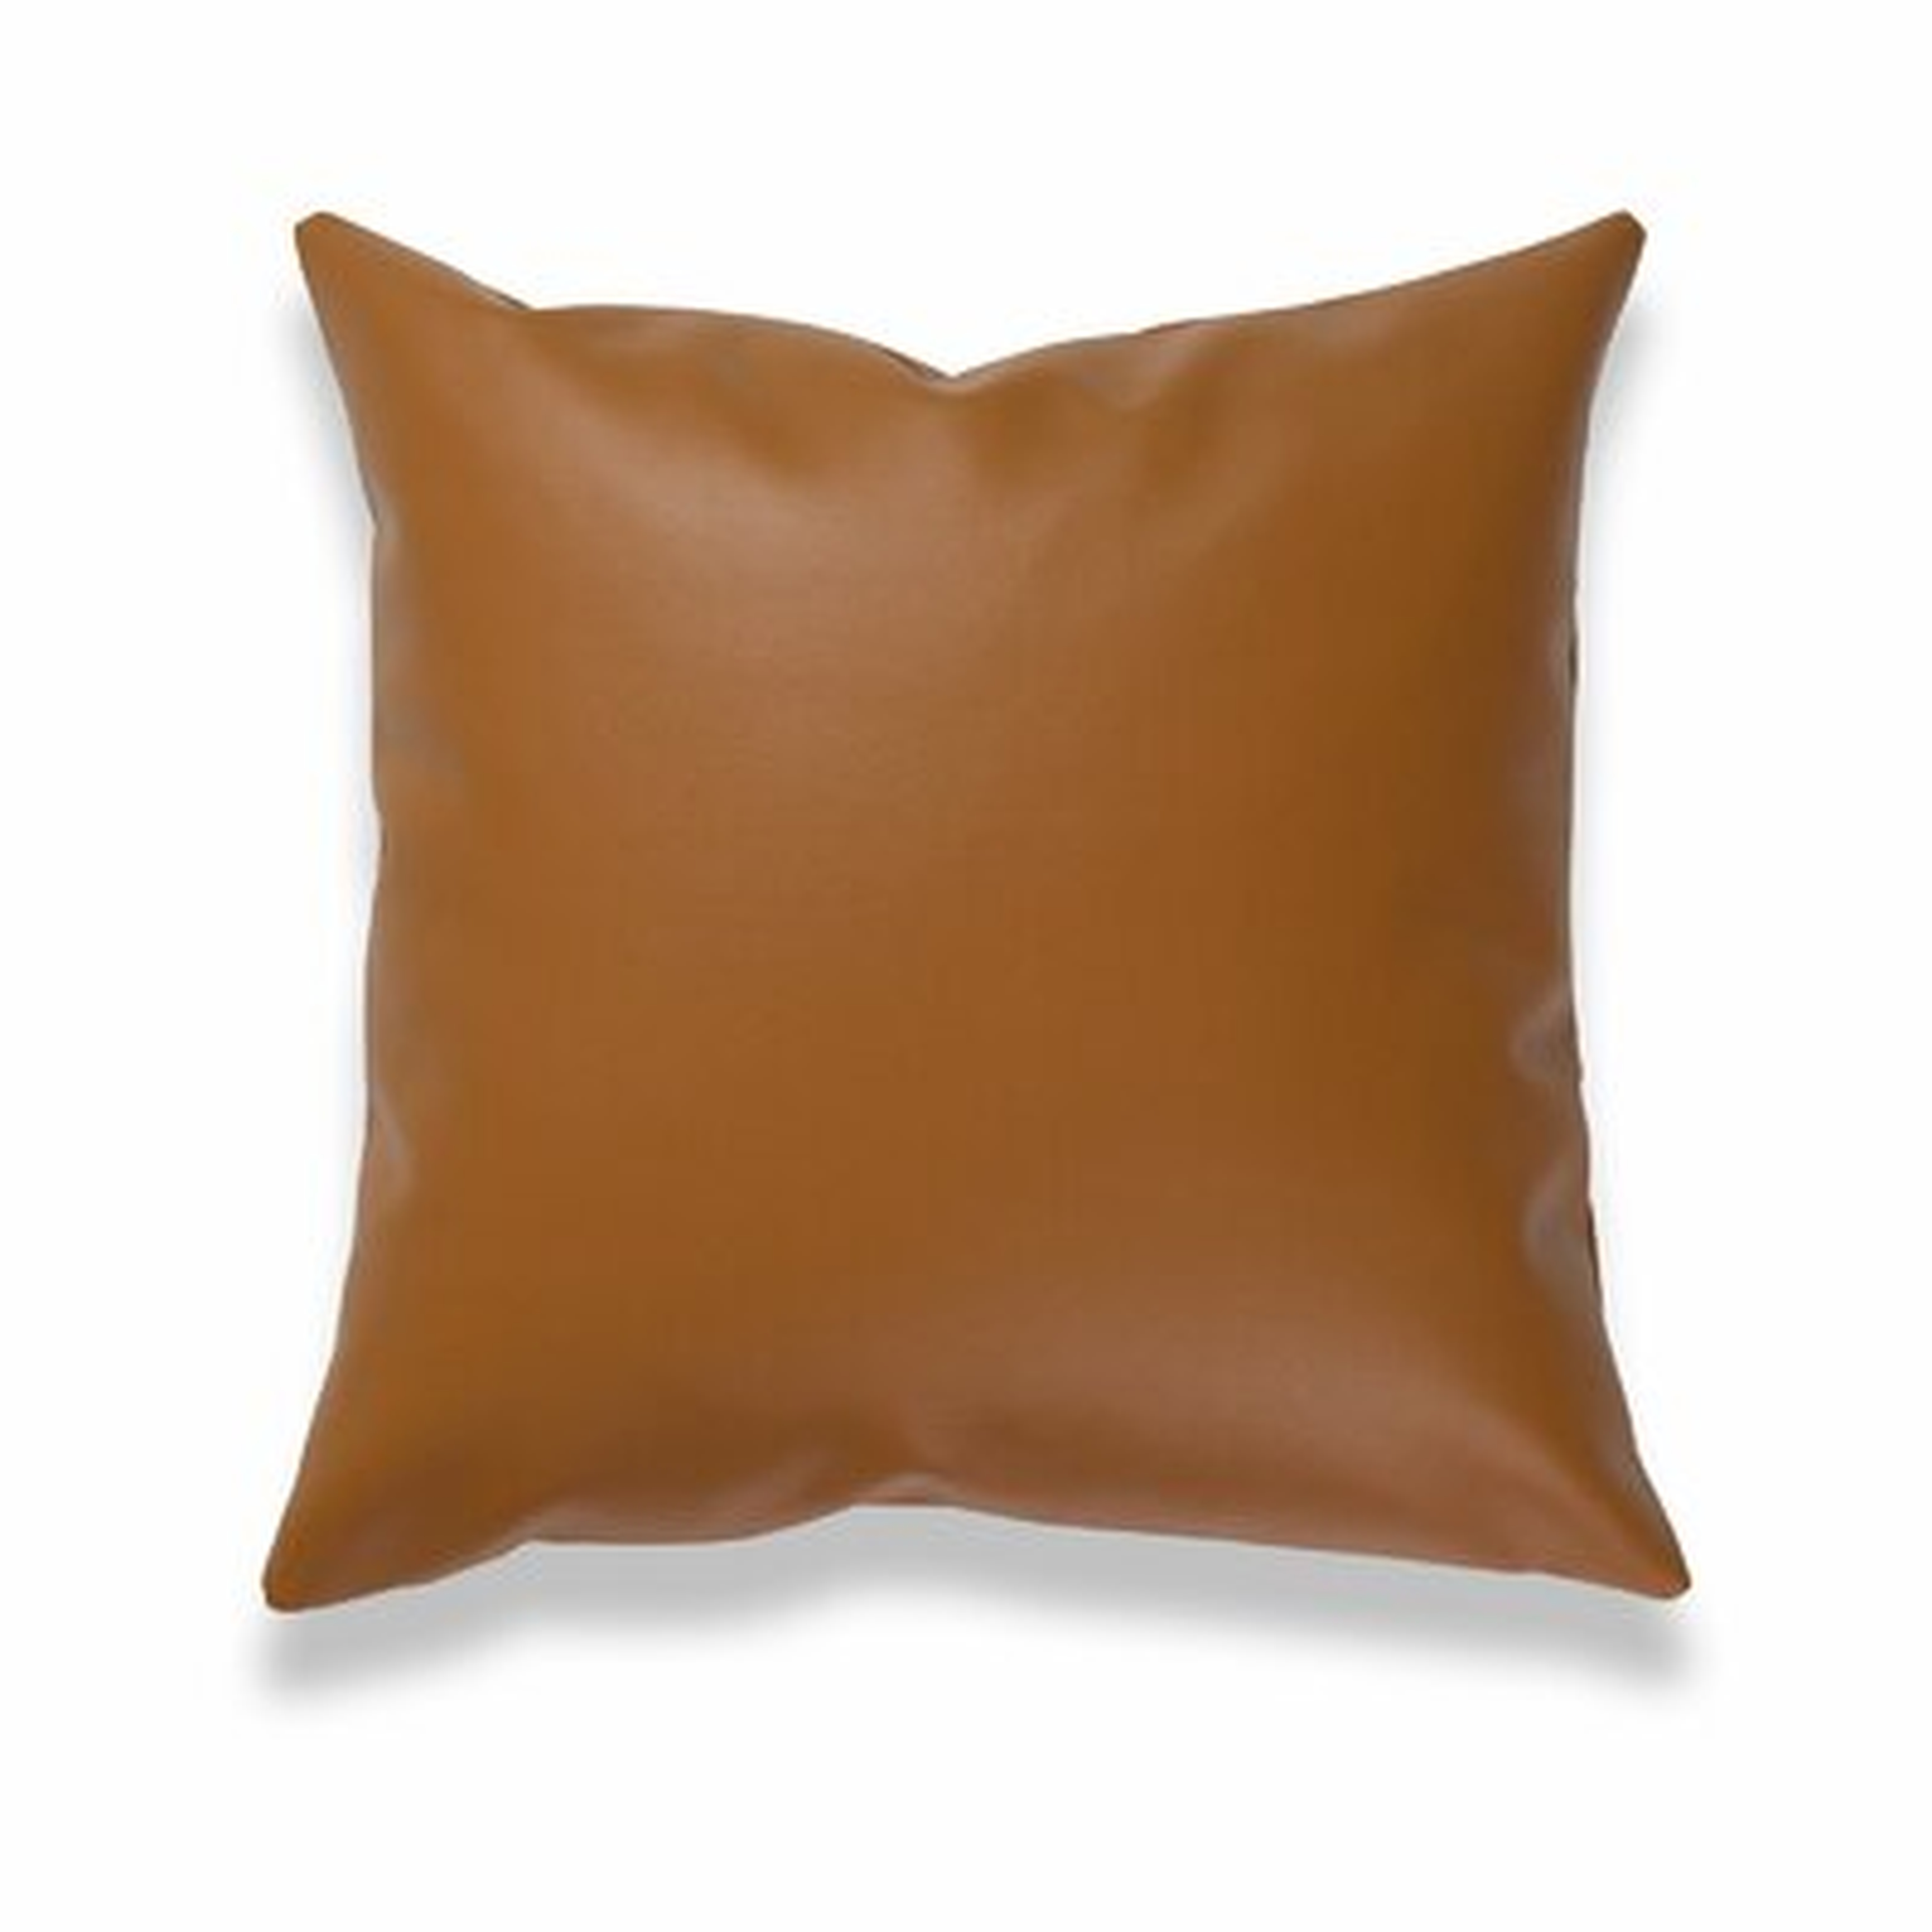 Cullompt Square Faux Leather Pillow Cover - Wayfair